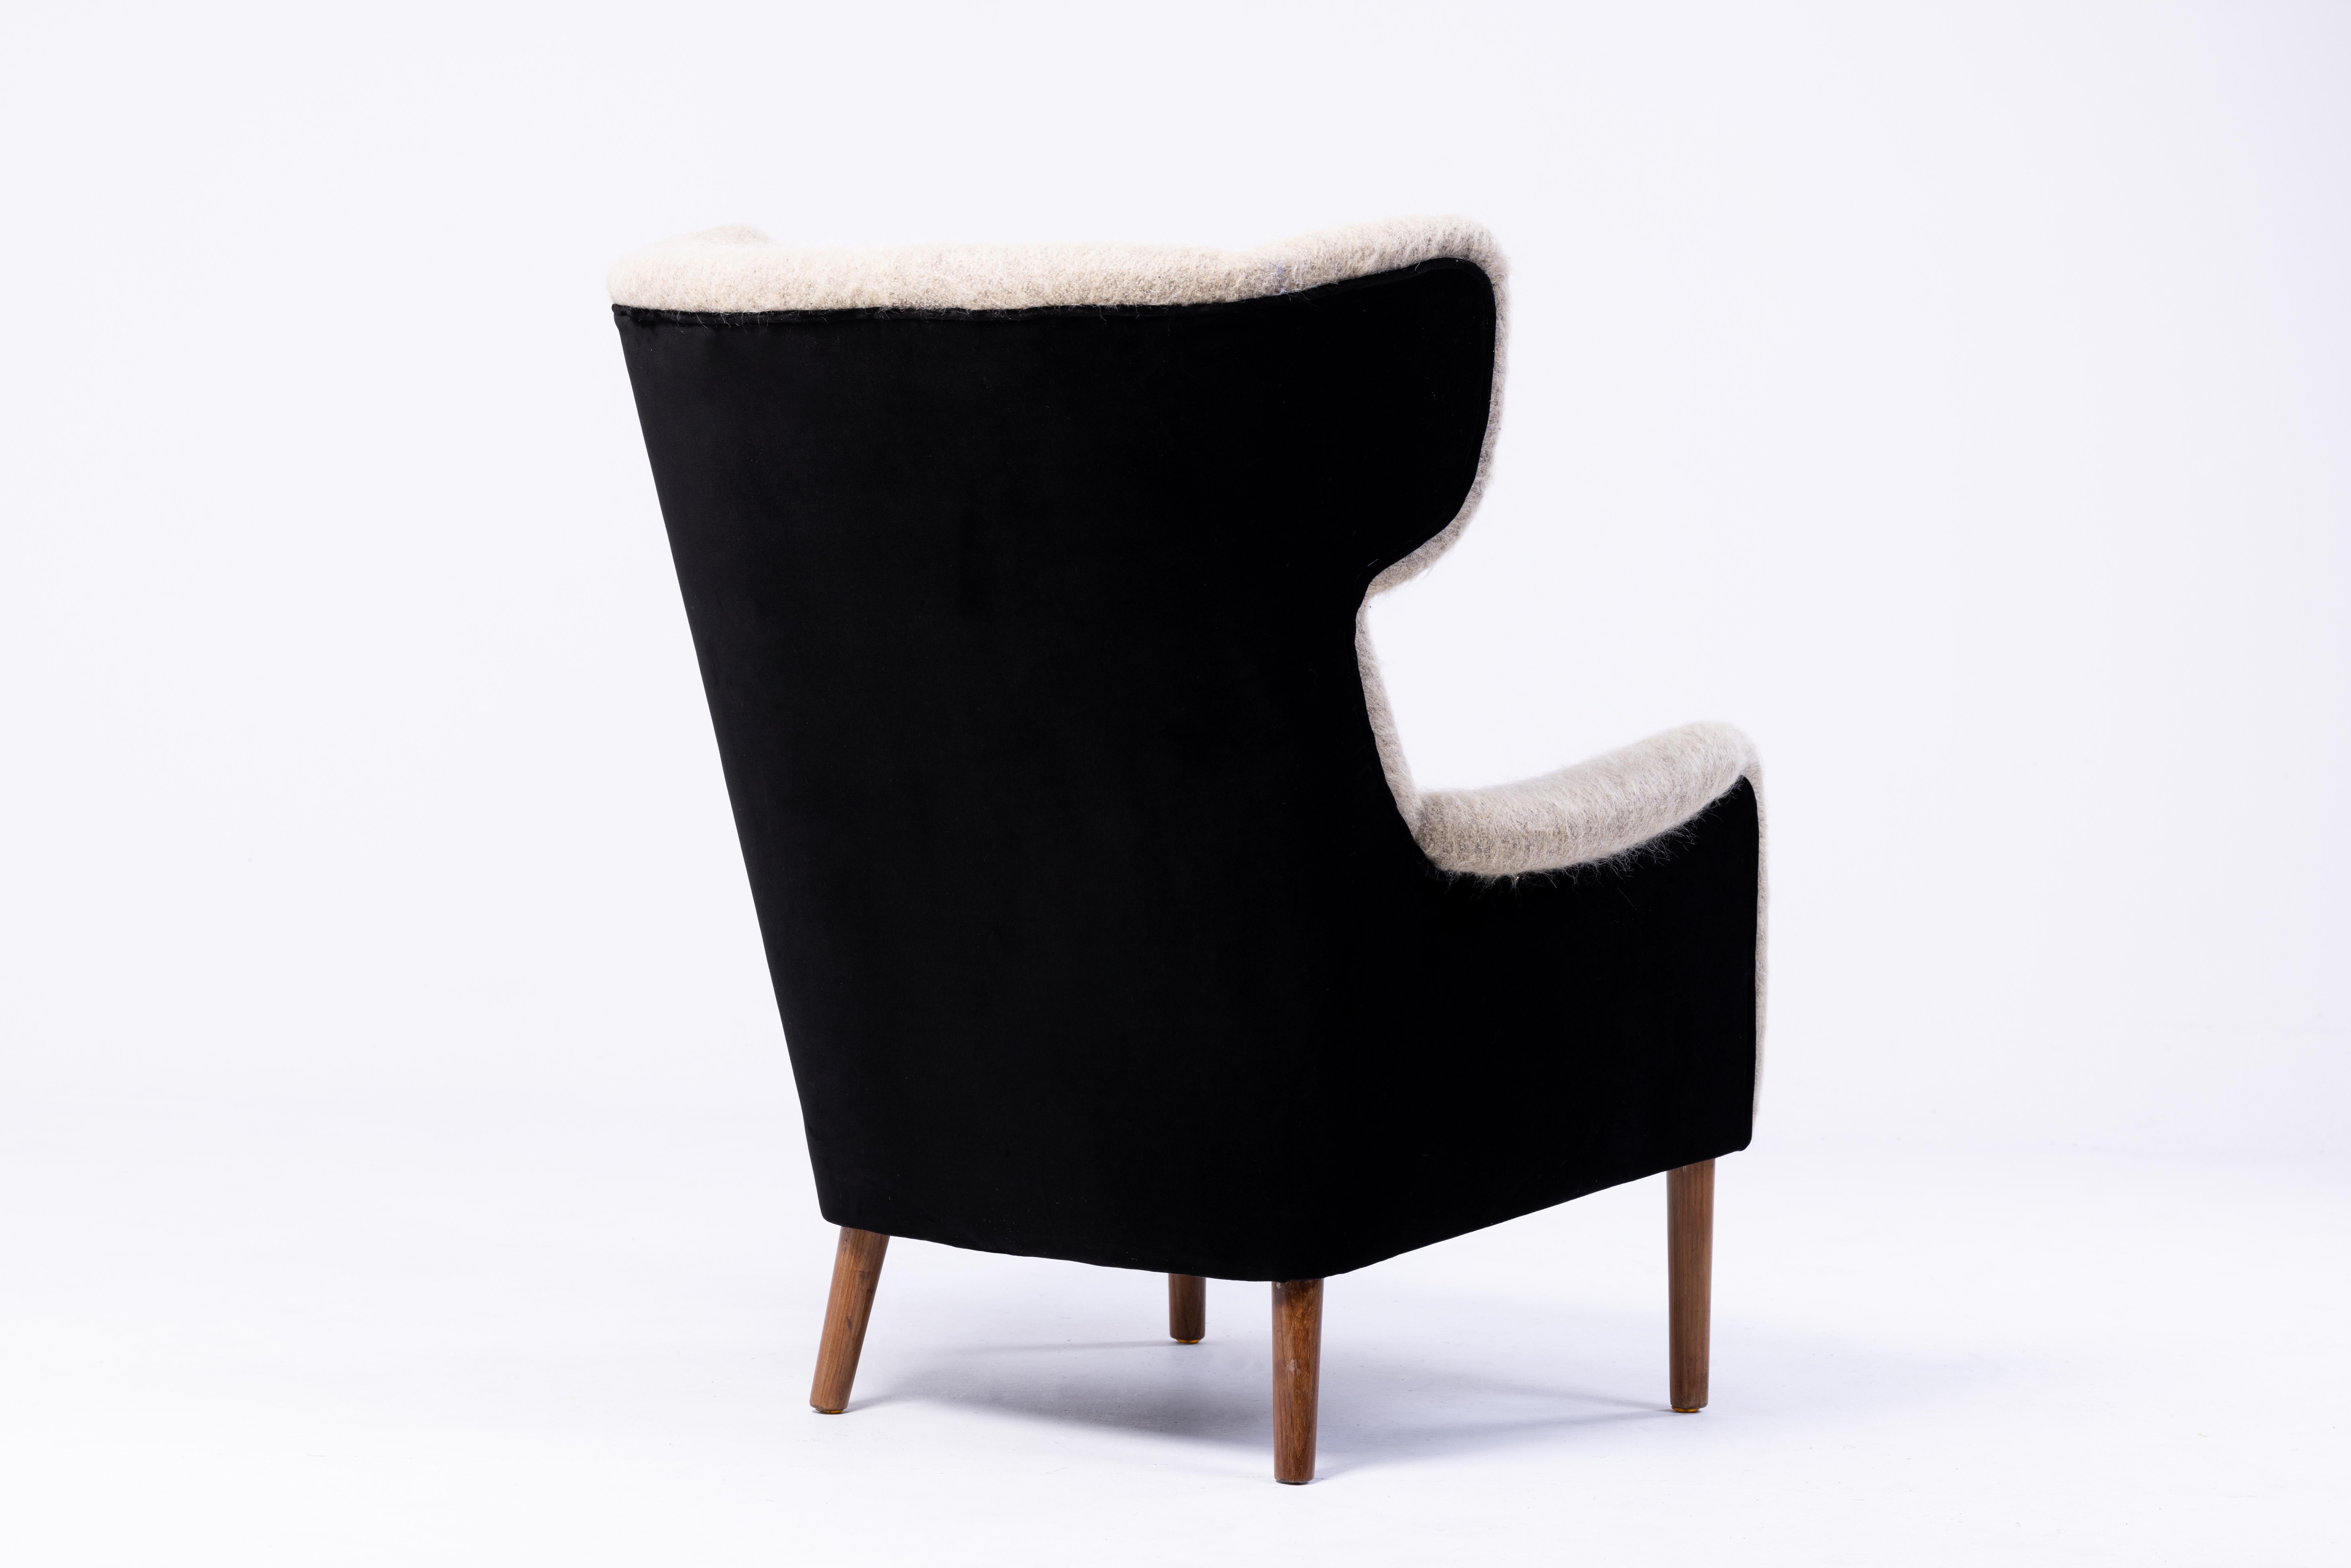 Velvet Danish Wingback Armchair, 1950s, in Hèrmes and Pierre Frey Fabric